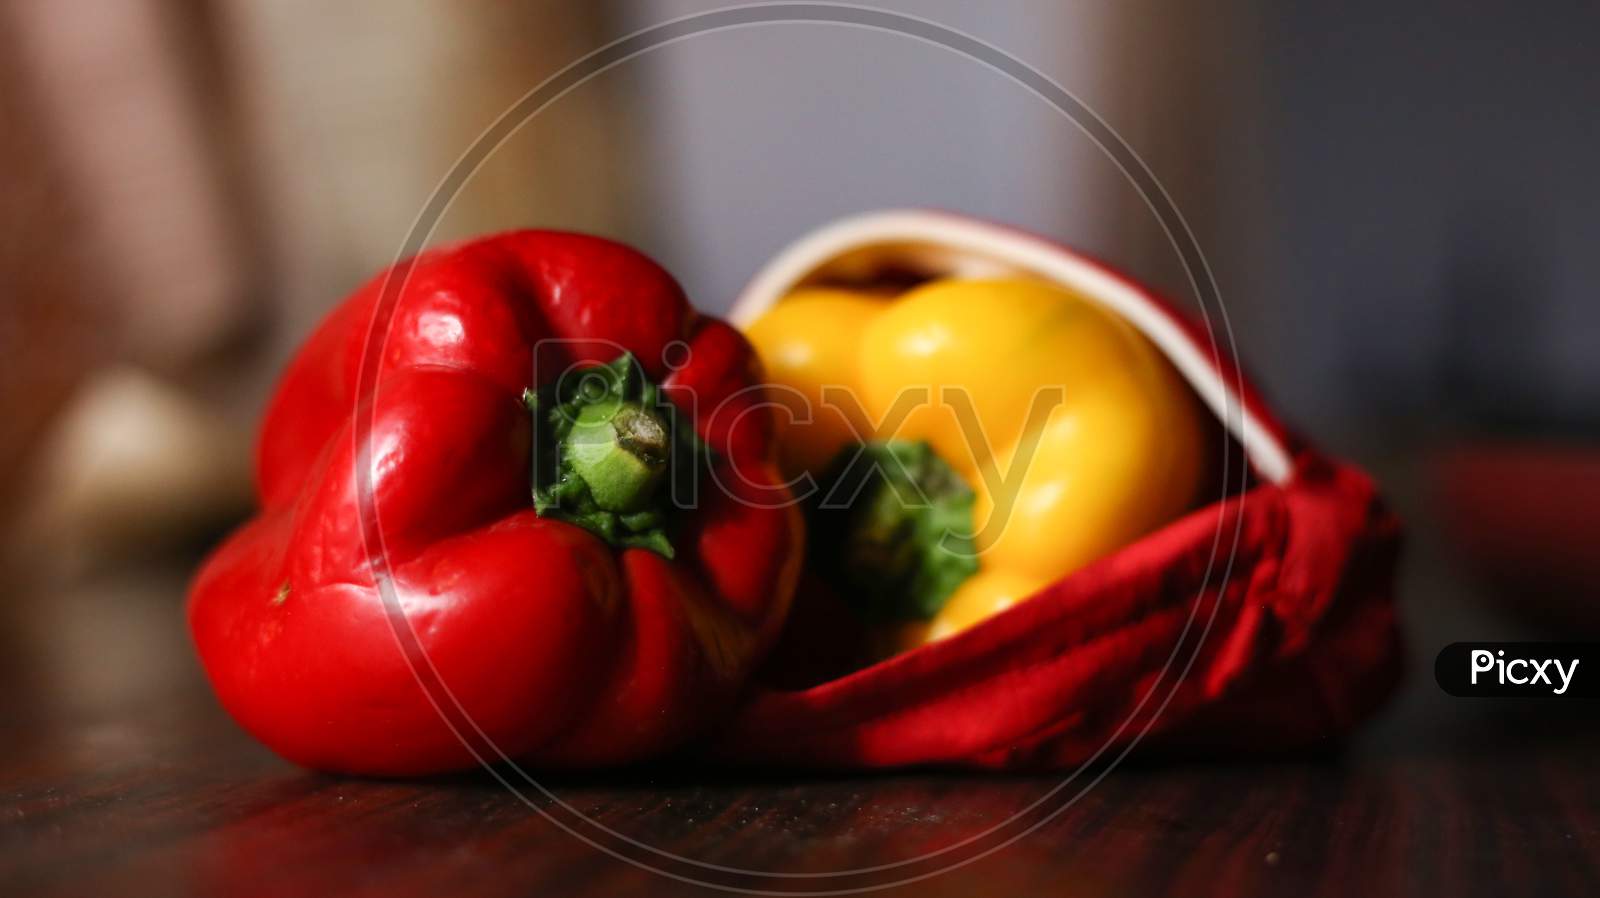 Closeup View Of Red And Yellow Color Bell Peppers In An Red Color Cloth With Wooden Background